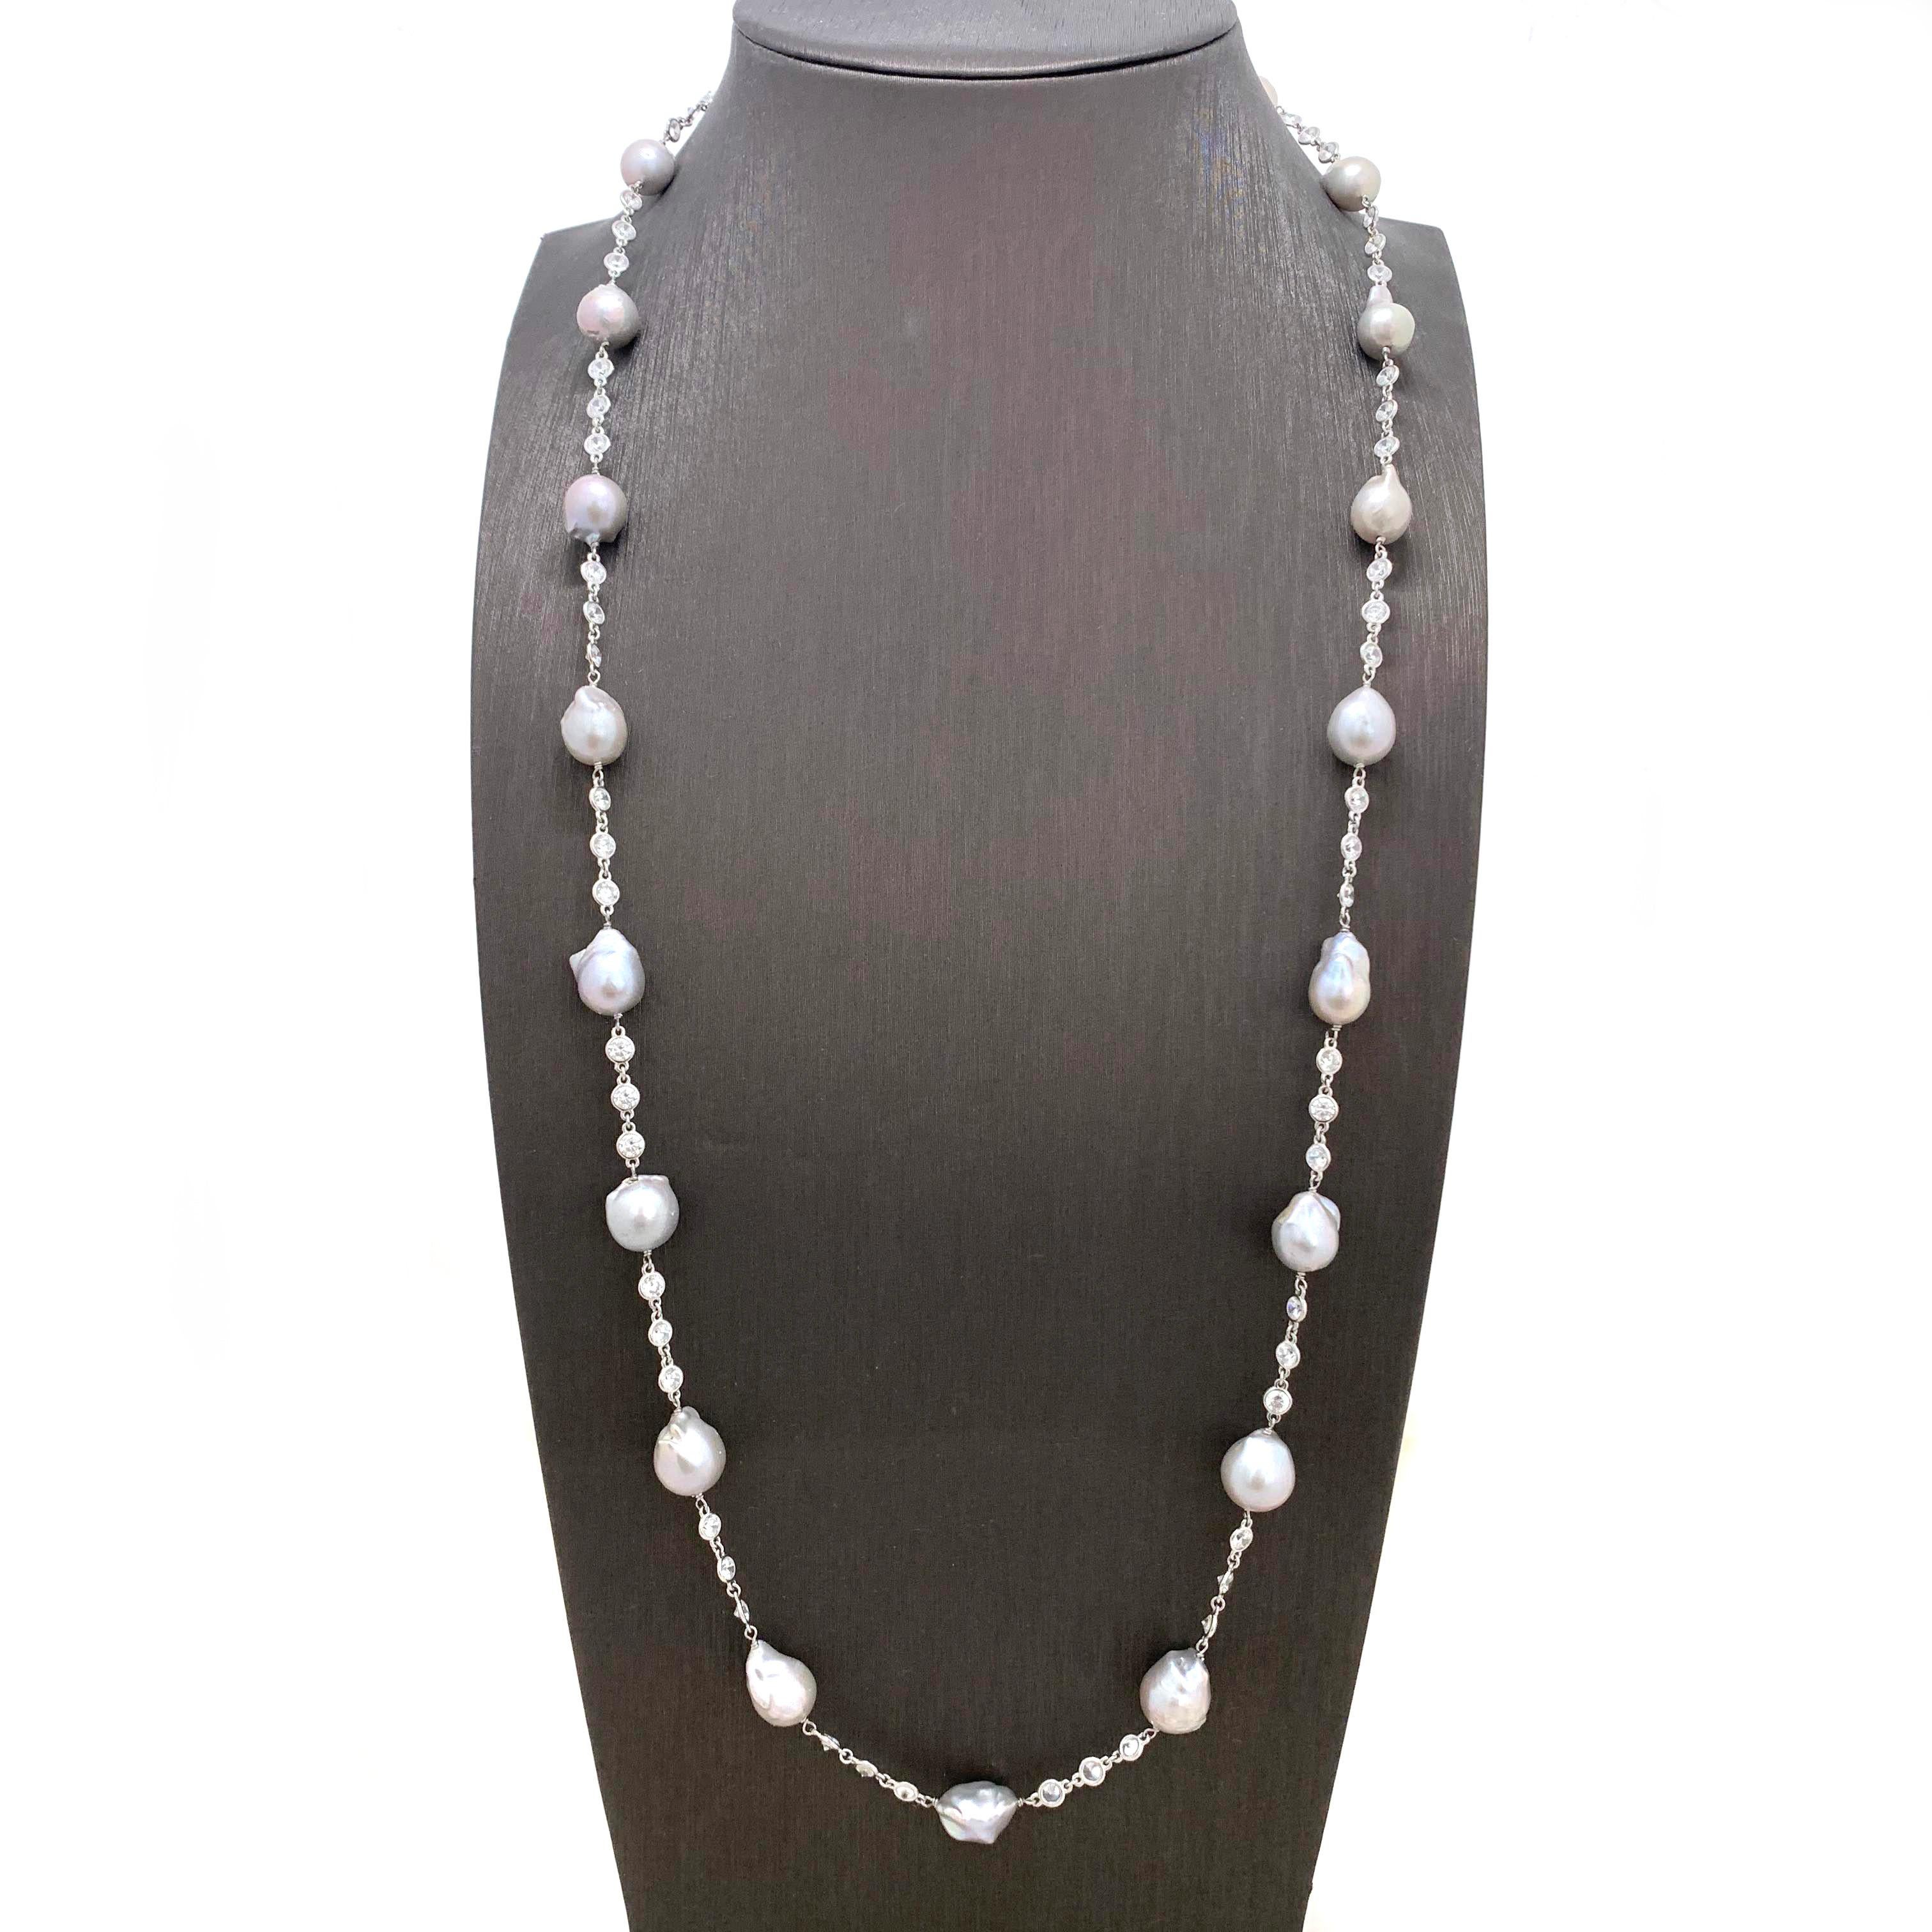 Grey Baroque Pearl Sterling Silver Long Station Necklace

The beautiful elegant necklace features 19 pieces of lustrous grey baroque pearl and continuous of hand bezel-set faceted simulated diamond cz (0.24ct size each - 16ct size total), all hand